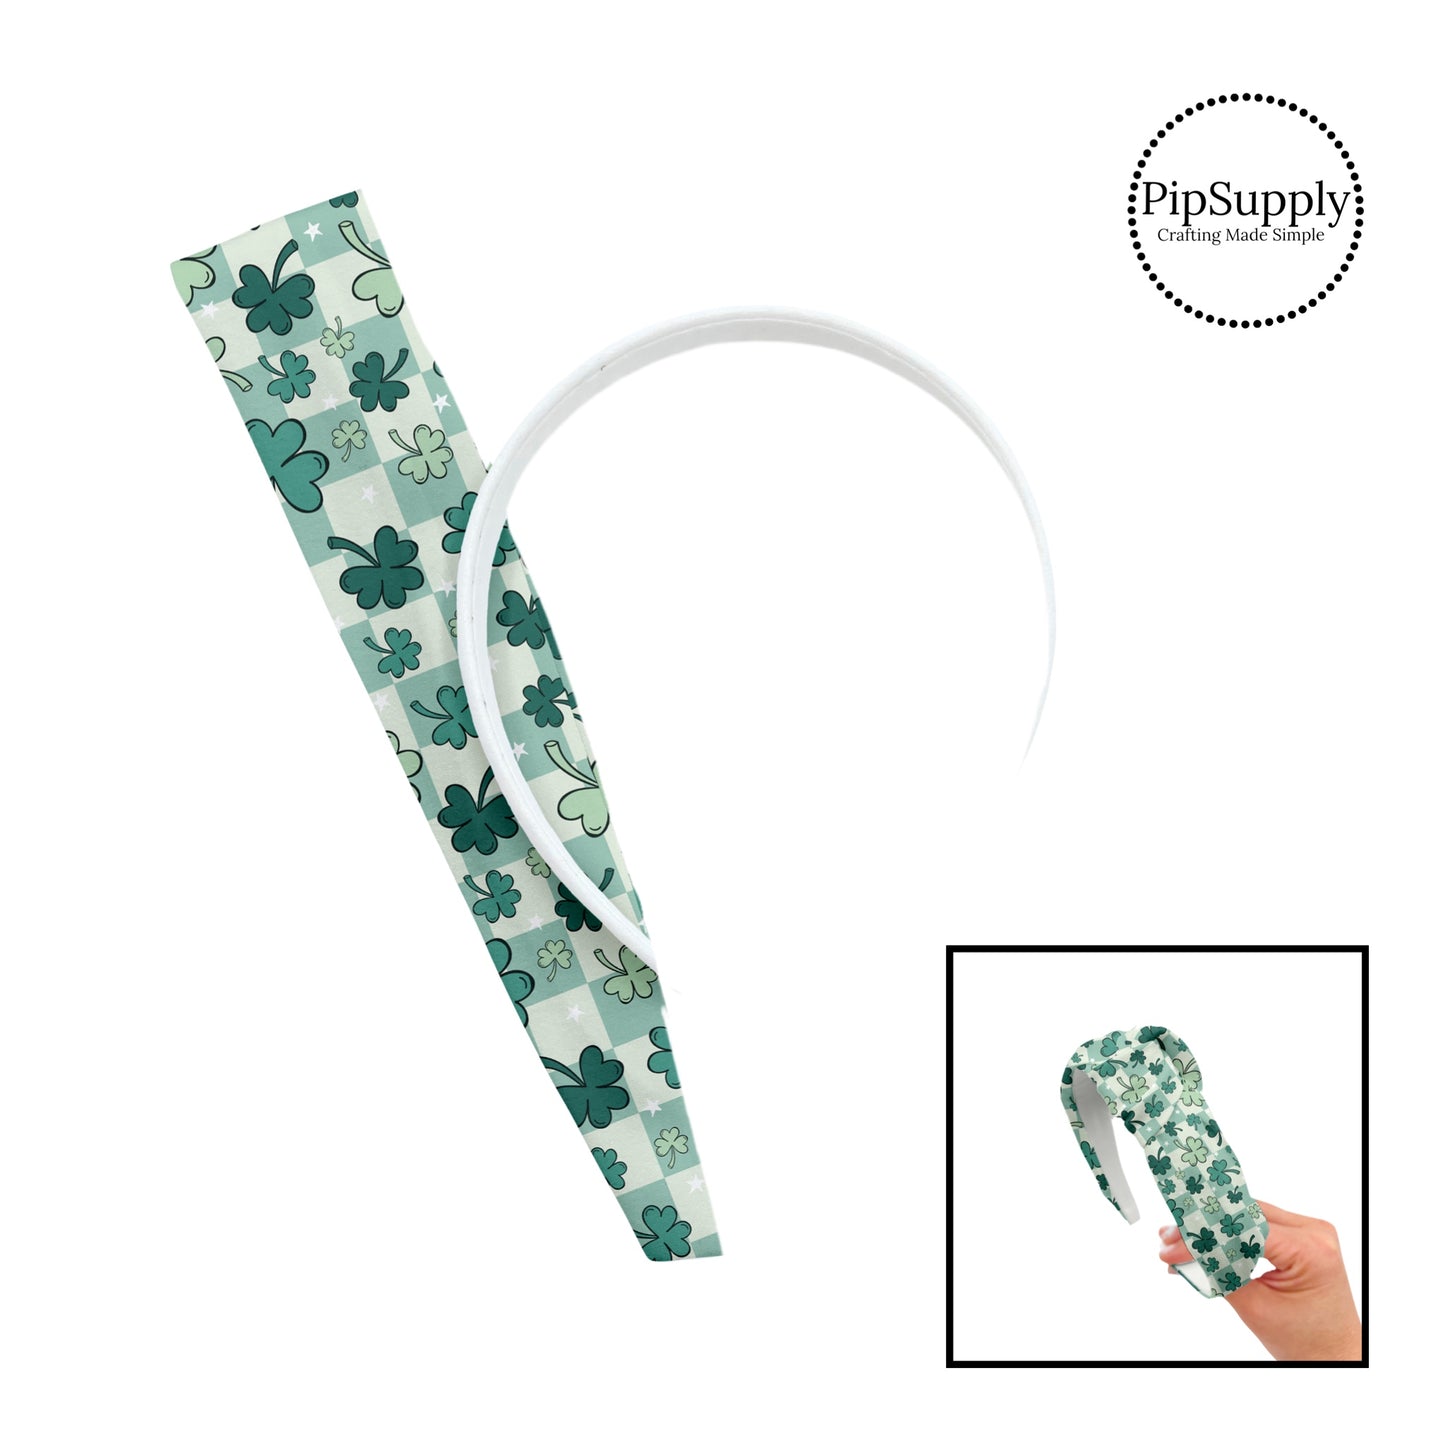 These patterned headband kits are easy to assemble and come with everything you need to make your own knotted headband. These St. Patrick's Day kits include a custom printed and sewn fabric strip and a coordinating velvet headband. This cute pattern features light green and dark green clovers on a cream and green checkered pattern.